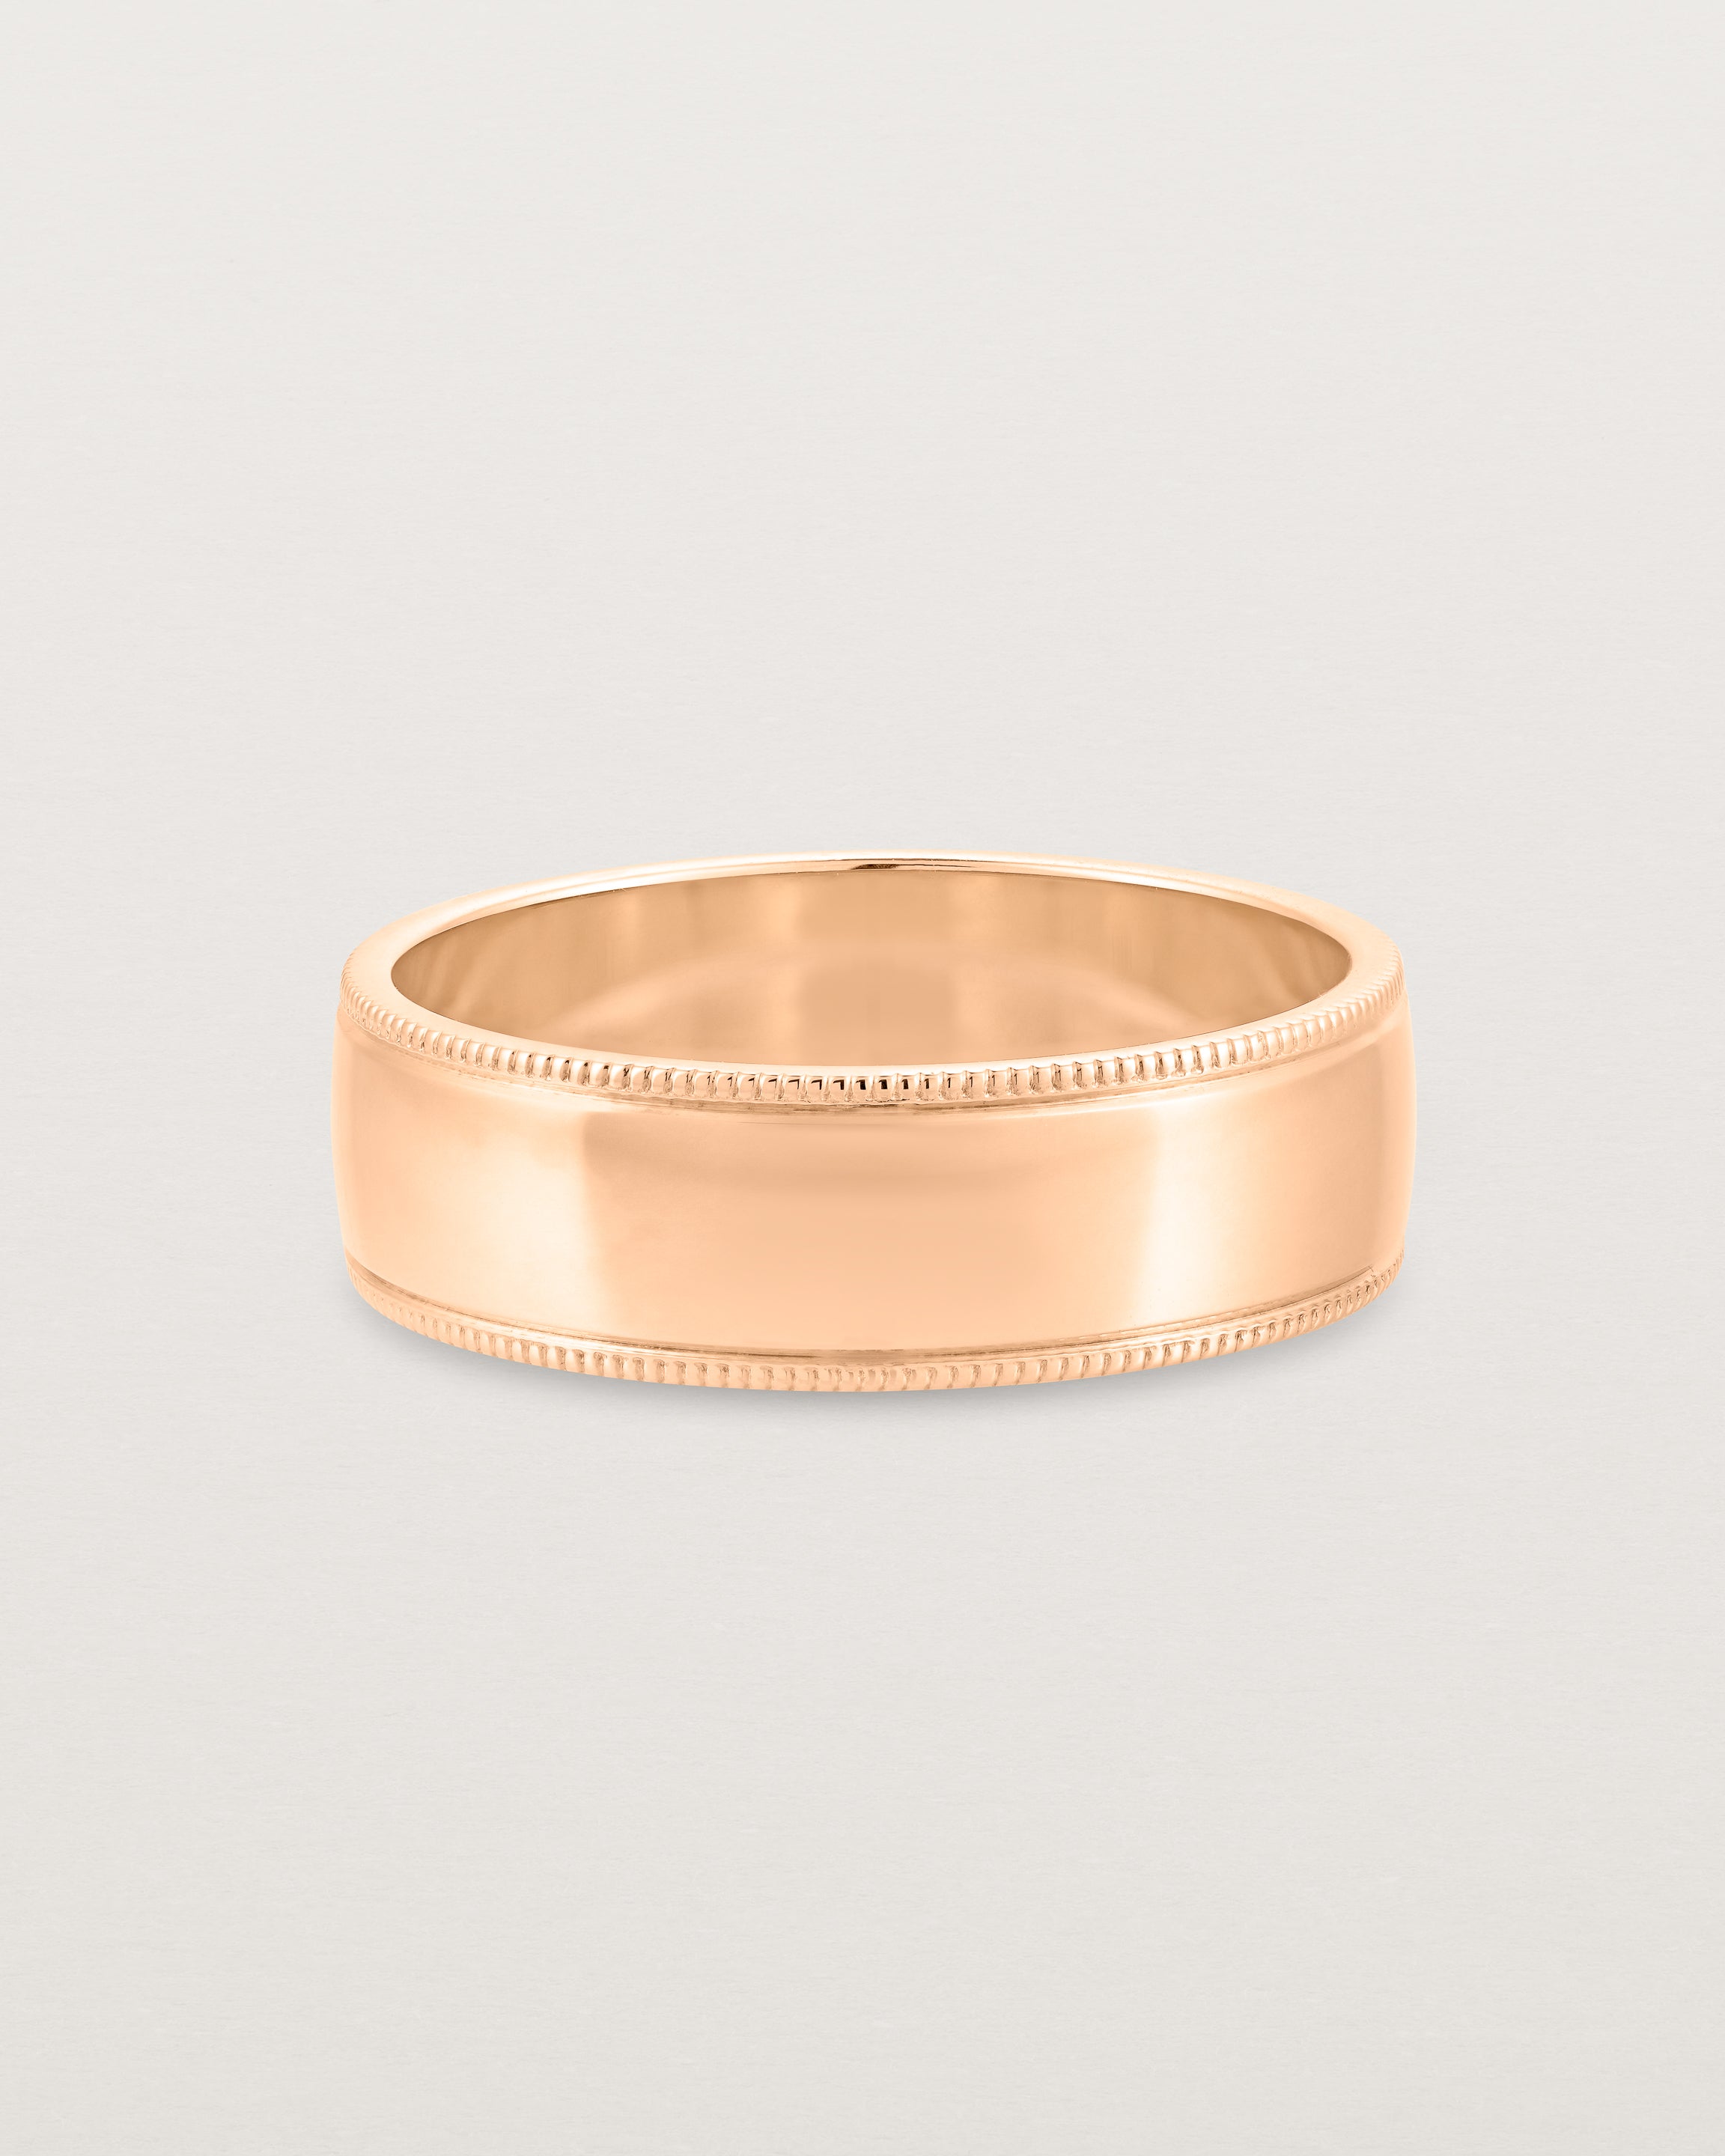 Front view of the Millgrain Wedding Ring | 6mm in Rose Gold.